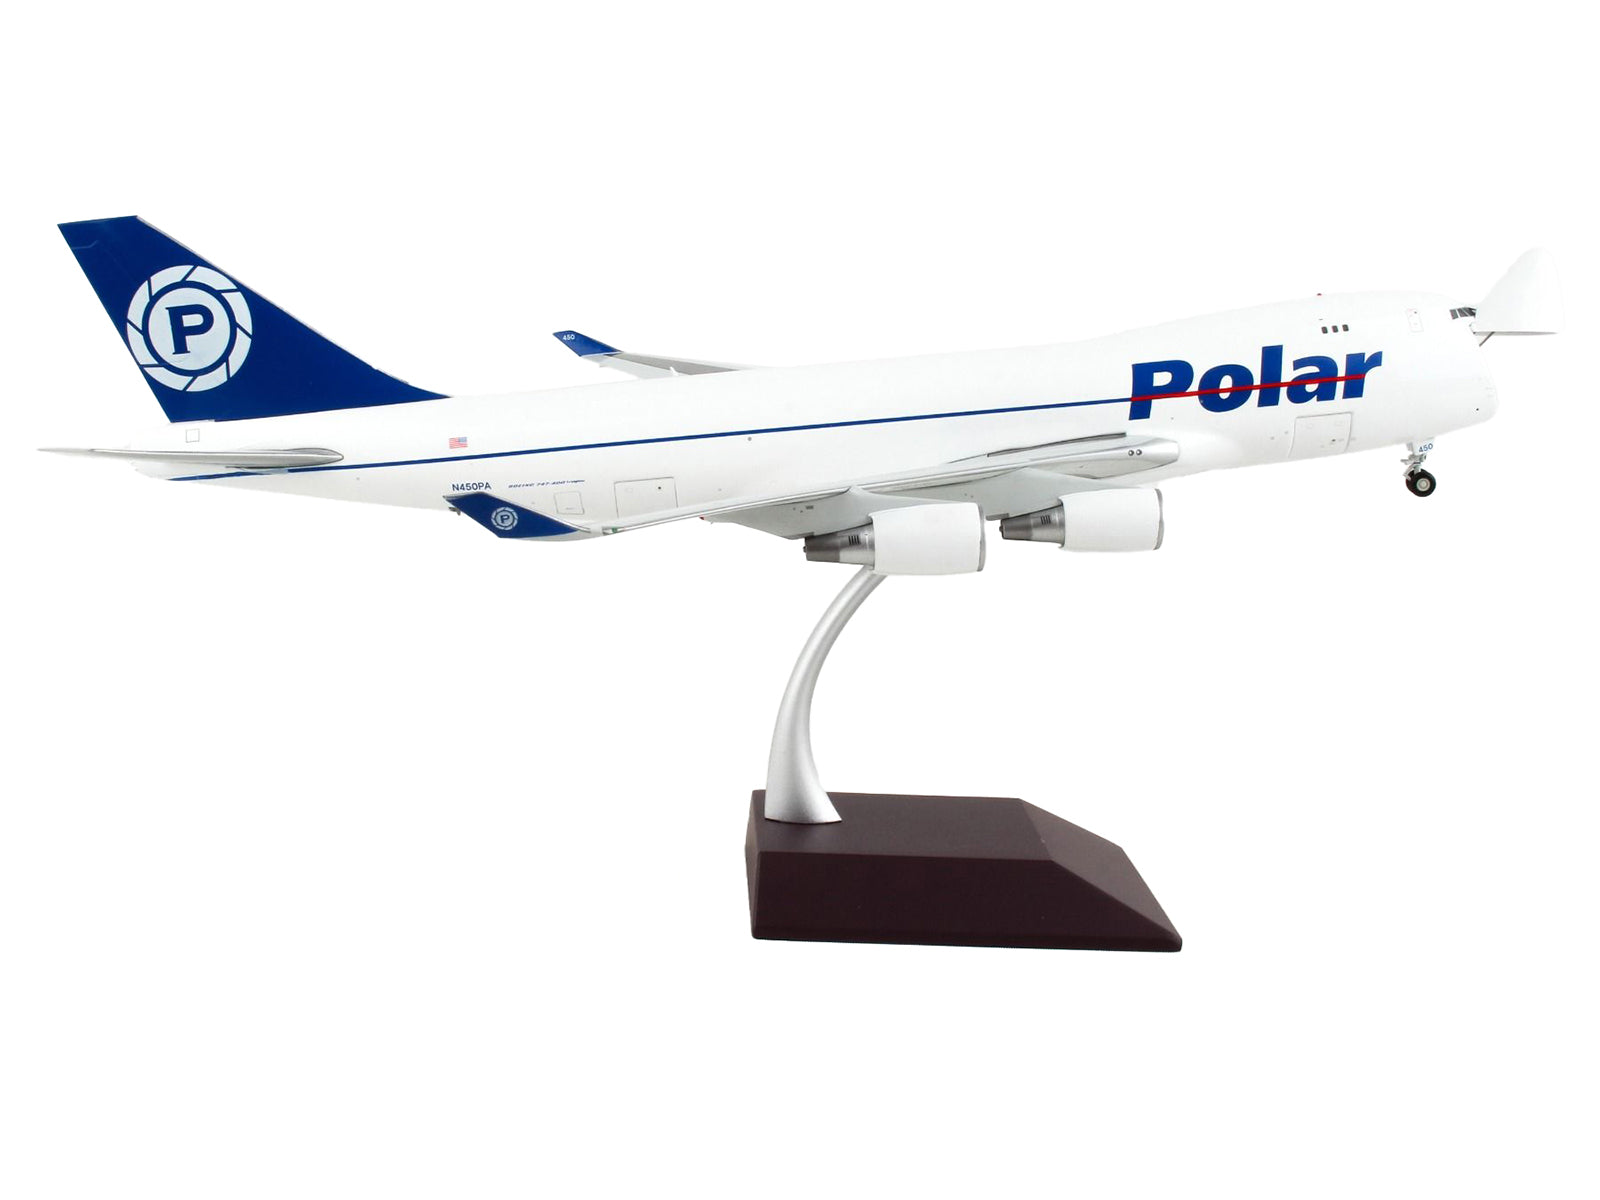 Boeing 747-400F Commercial Aircraft "Polar Air Cargo" White with Blue Tail "Gemini 200 - Interactive" Series 1/200 Diecast Model Airplane by GeminiJets